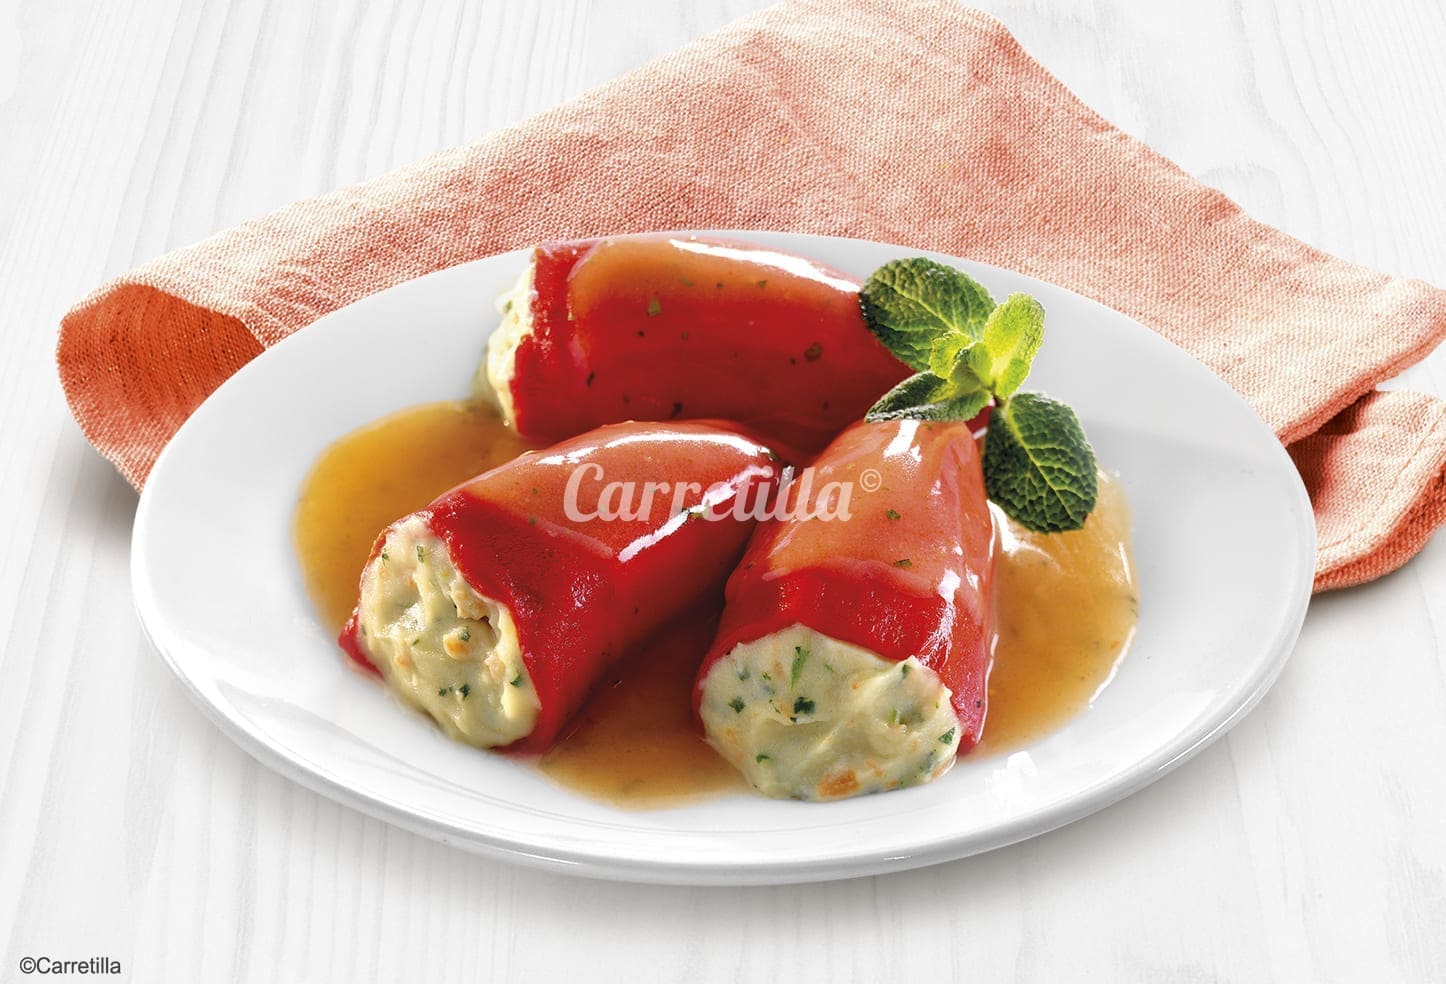 Piquillo Peppers stuffed with Seafood